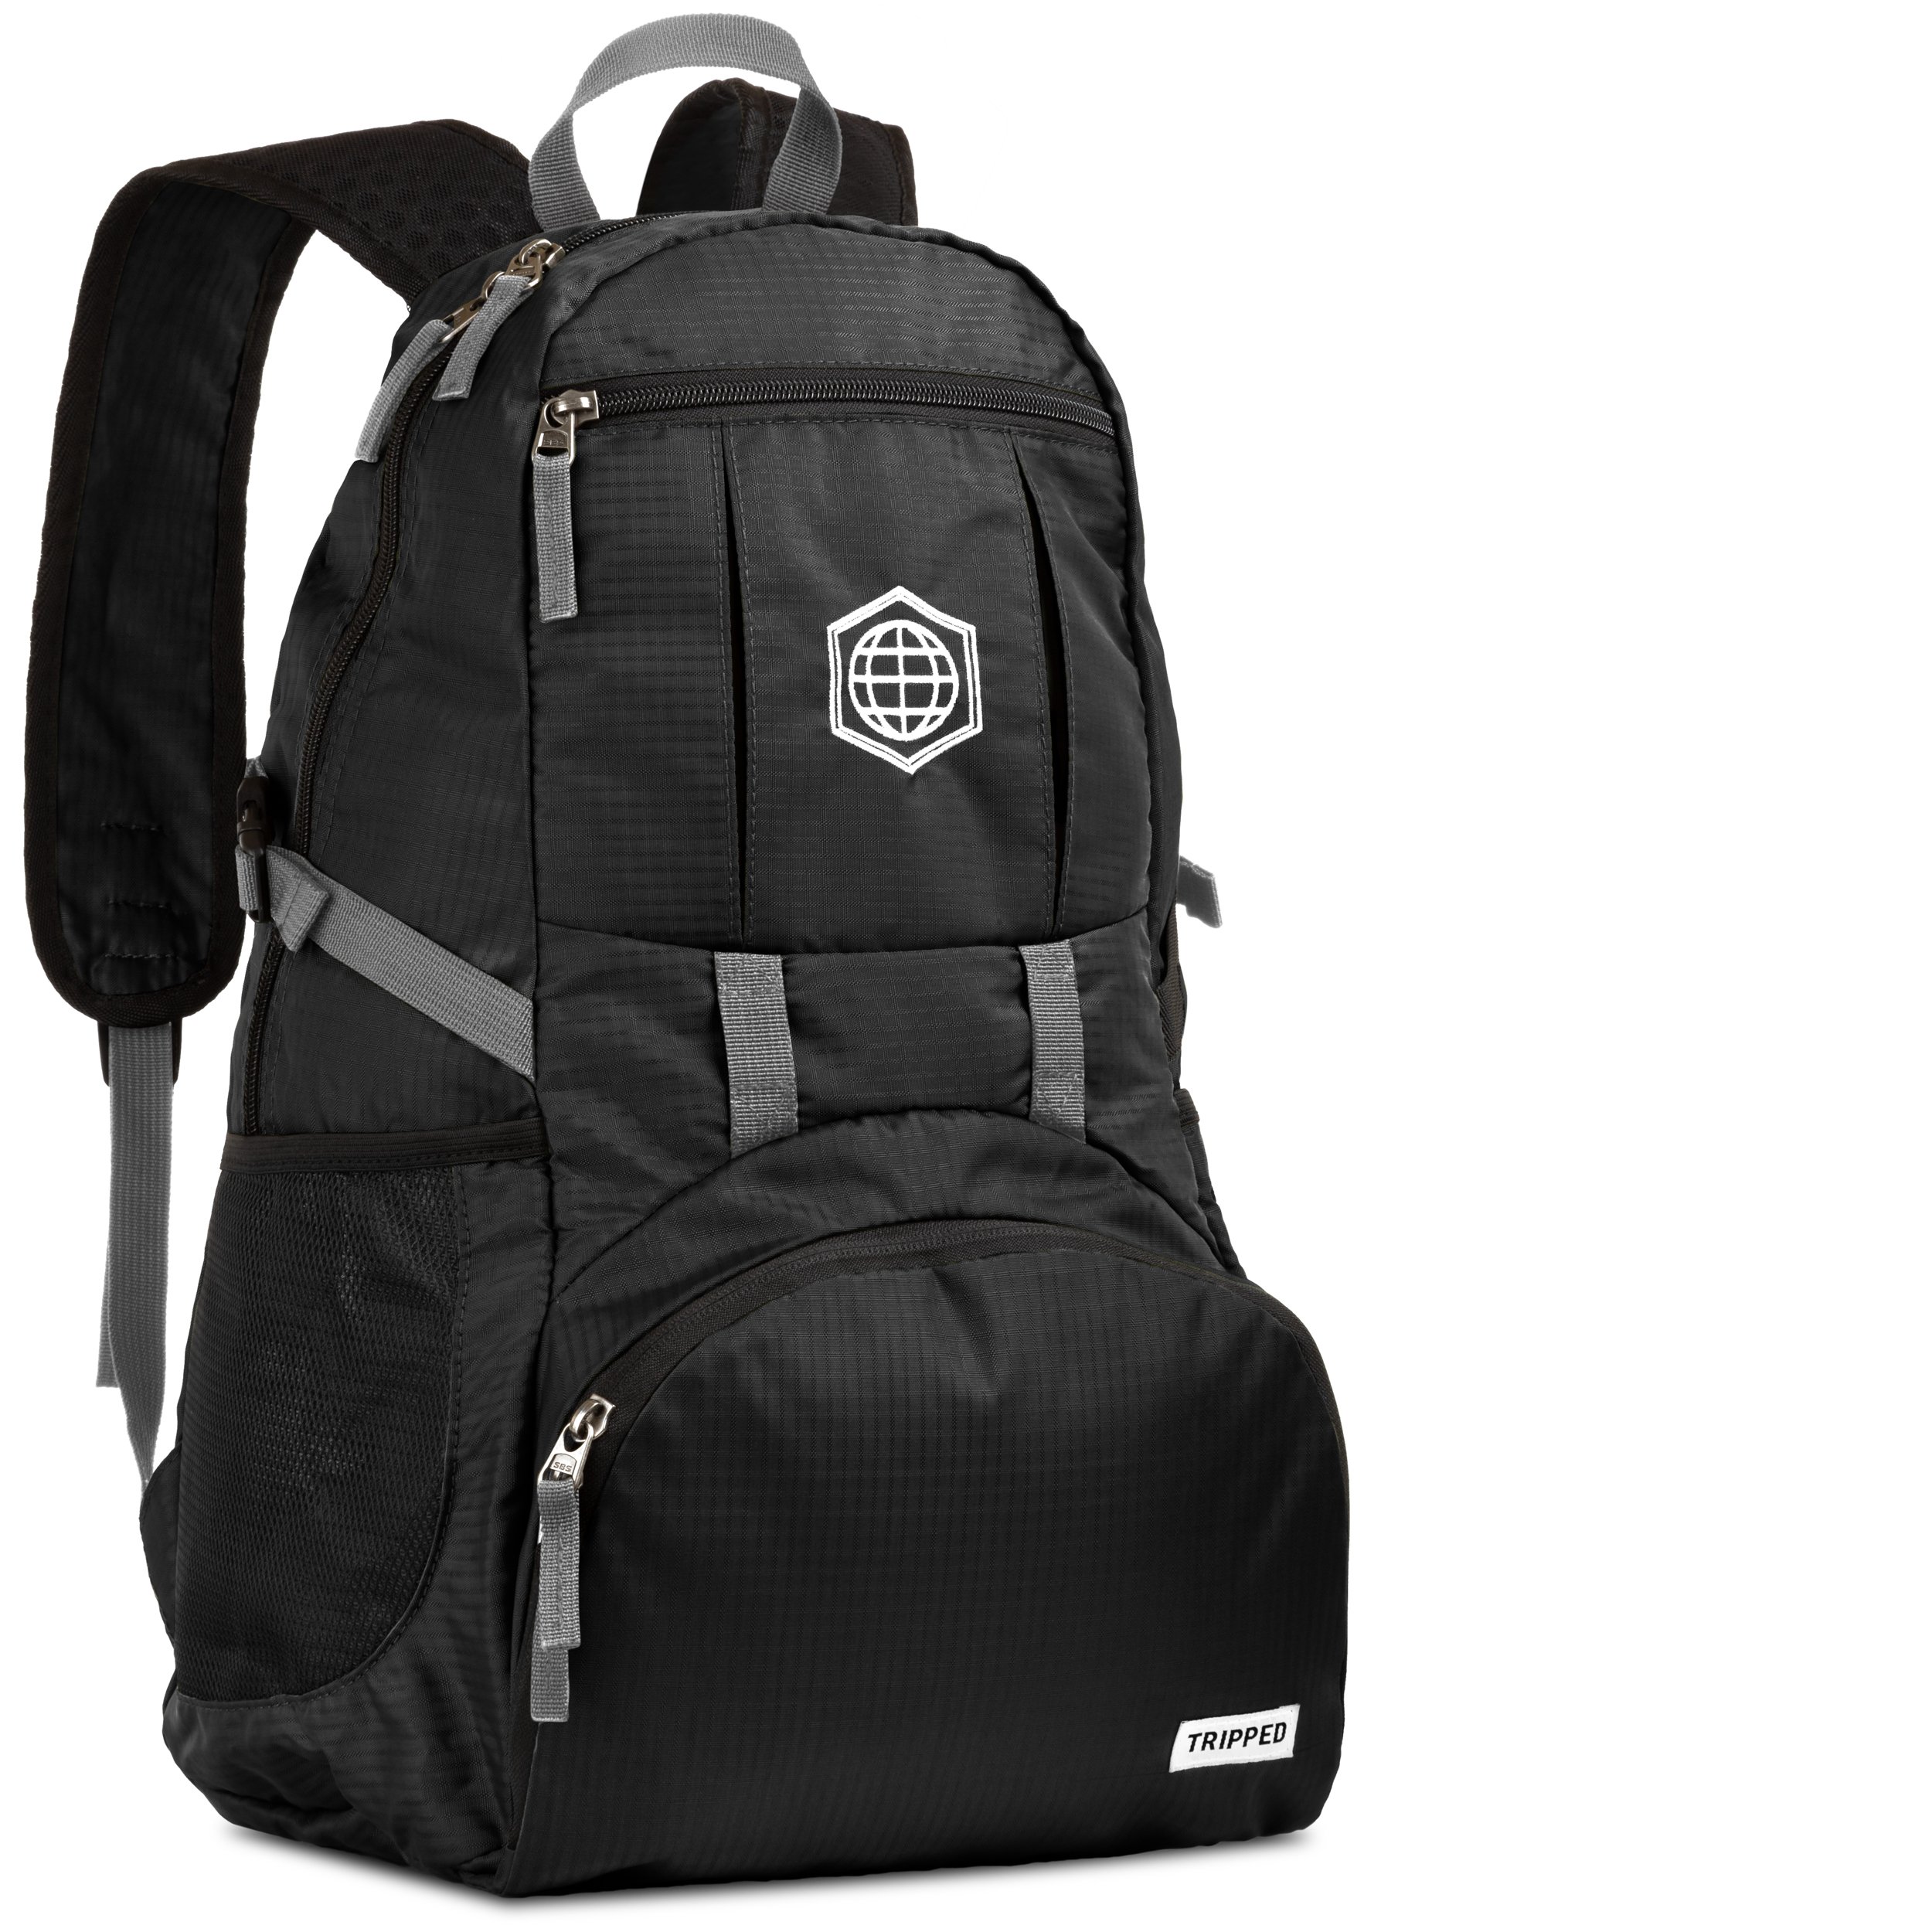 THE DAYPACK